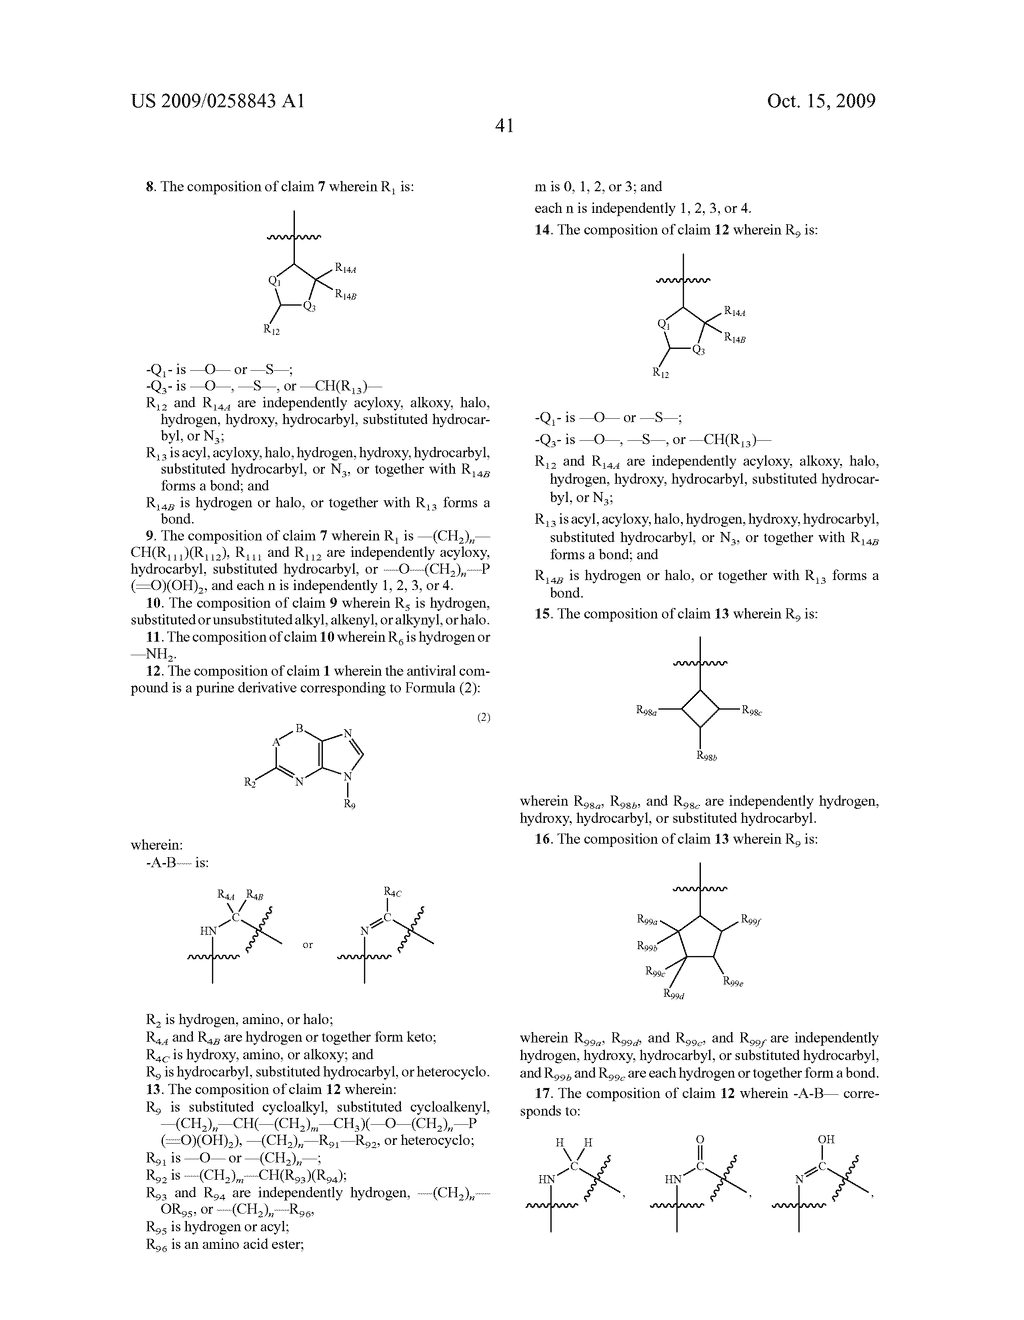 Compositions Containing Antiviral Compounds and Methods of Using the Same - diagram, schematic, and image 42